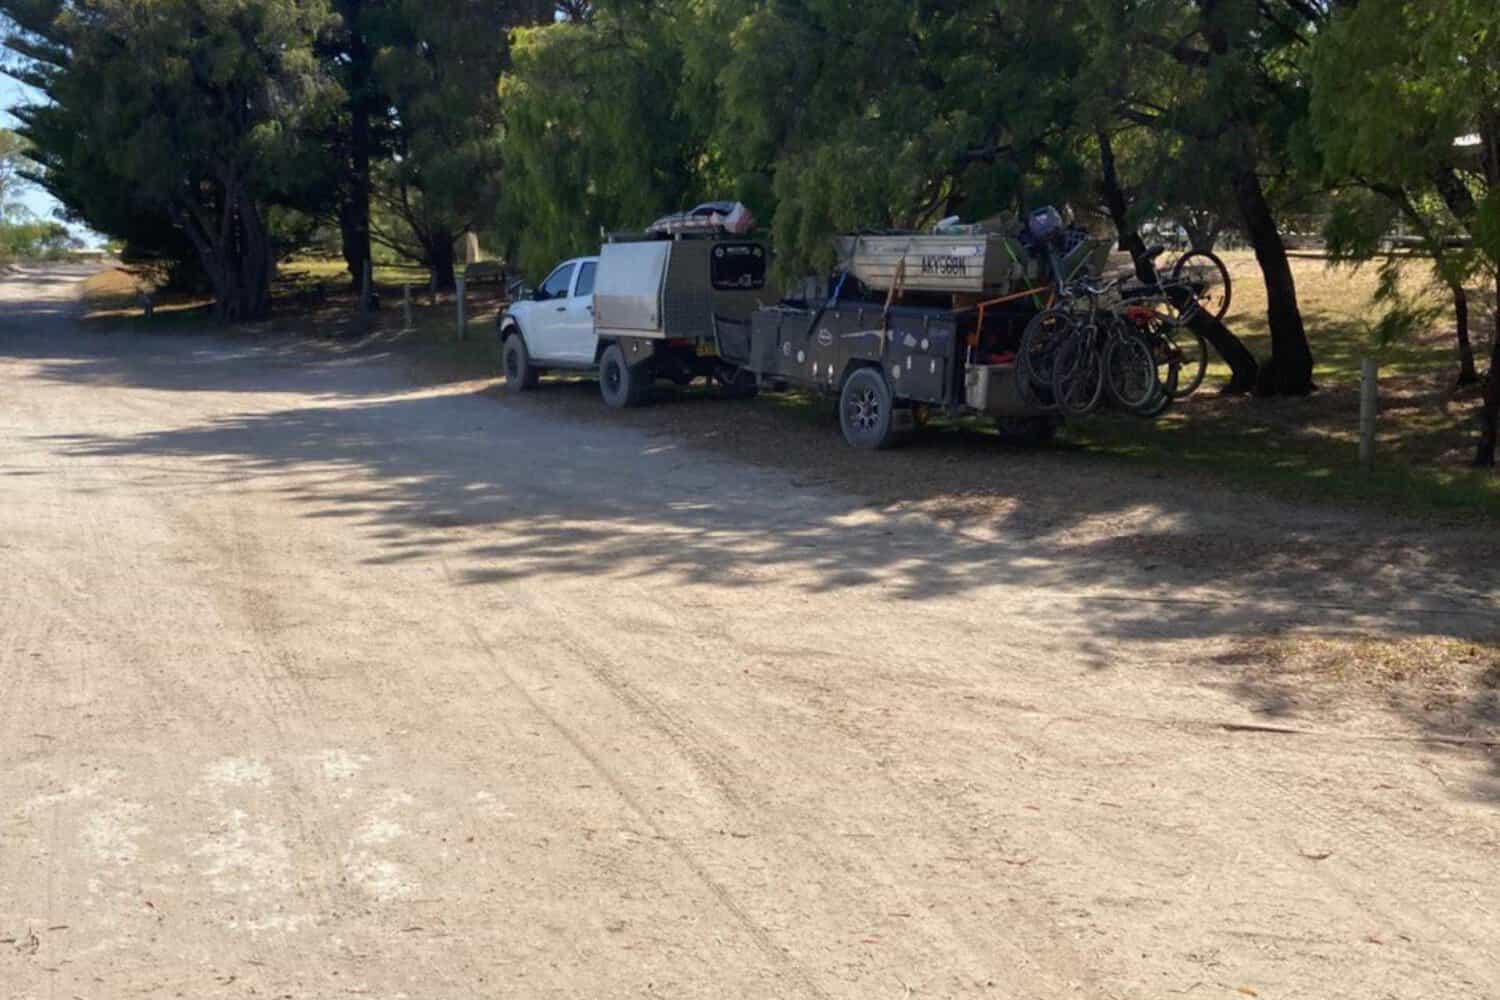 A white pickup truck with a camper trailer and bicycles parked under the shade of trees on a dusty road, suggesting preparations for an outdoor adventure in the Margaret River region.